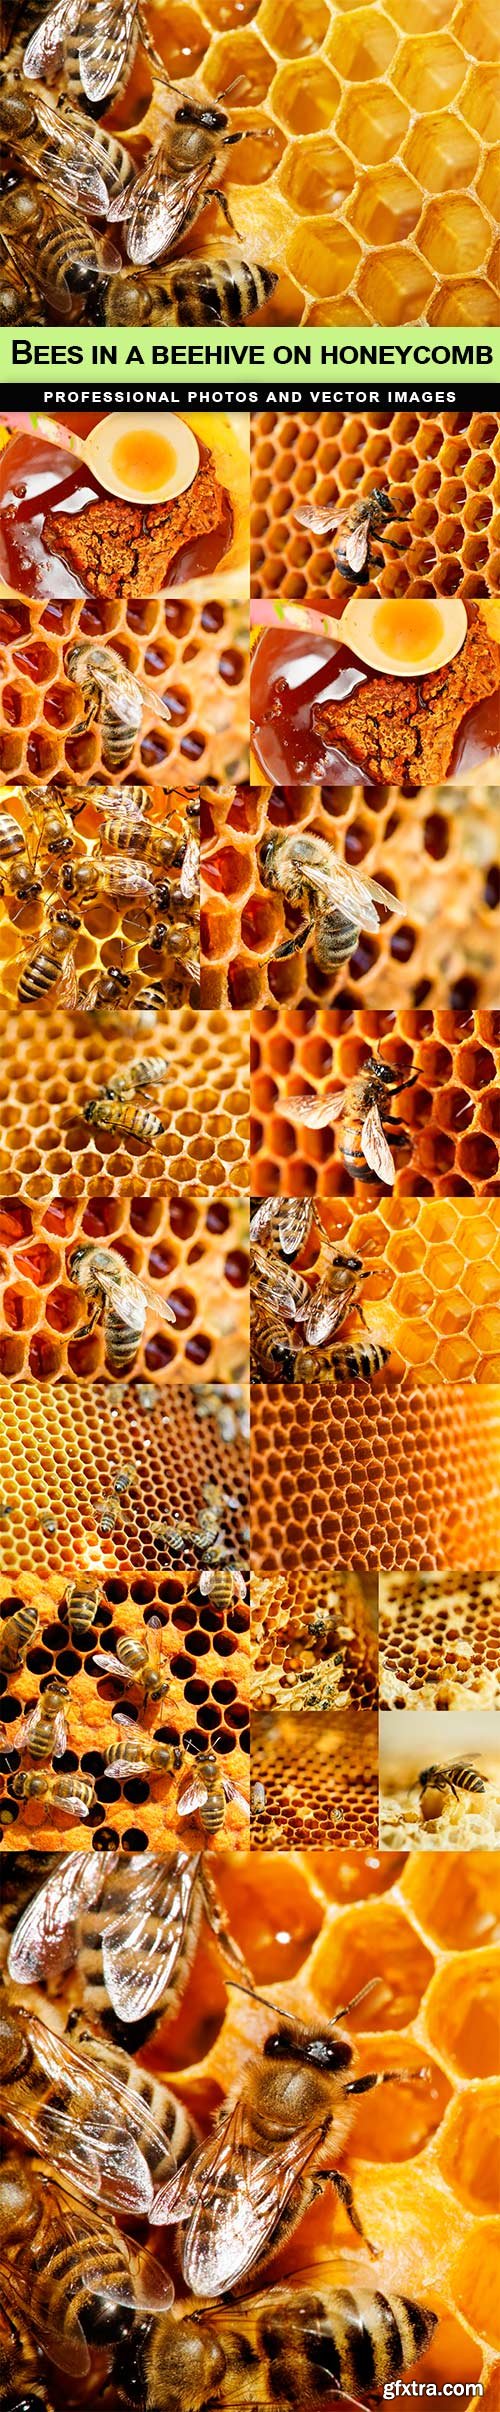 Bees in a beehive on honeycomb - 15 UHQ JPEG